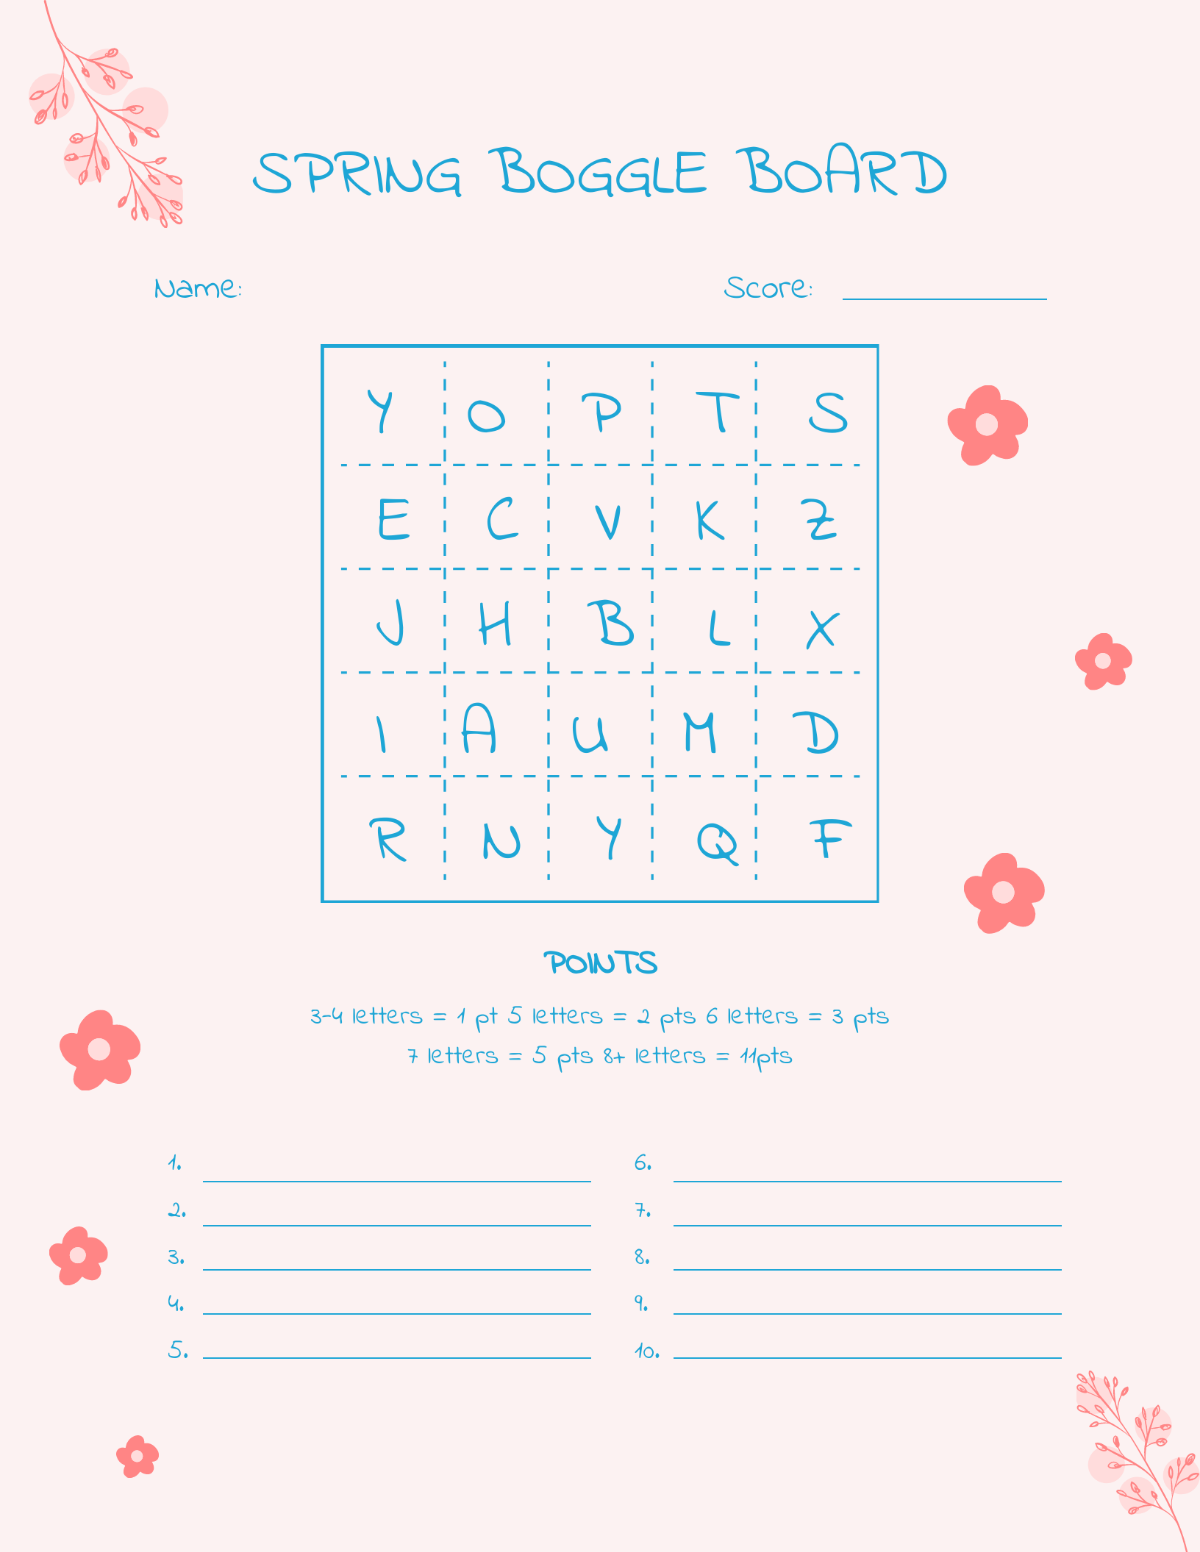 Spring Boggle Board Template